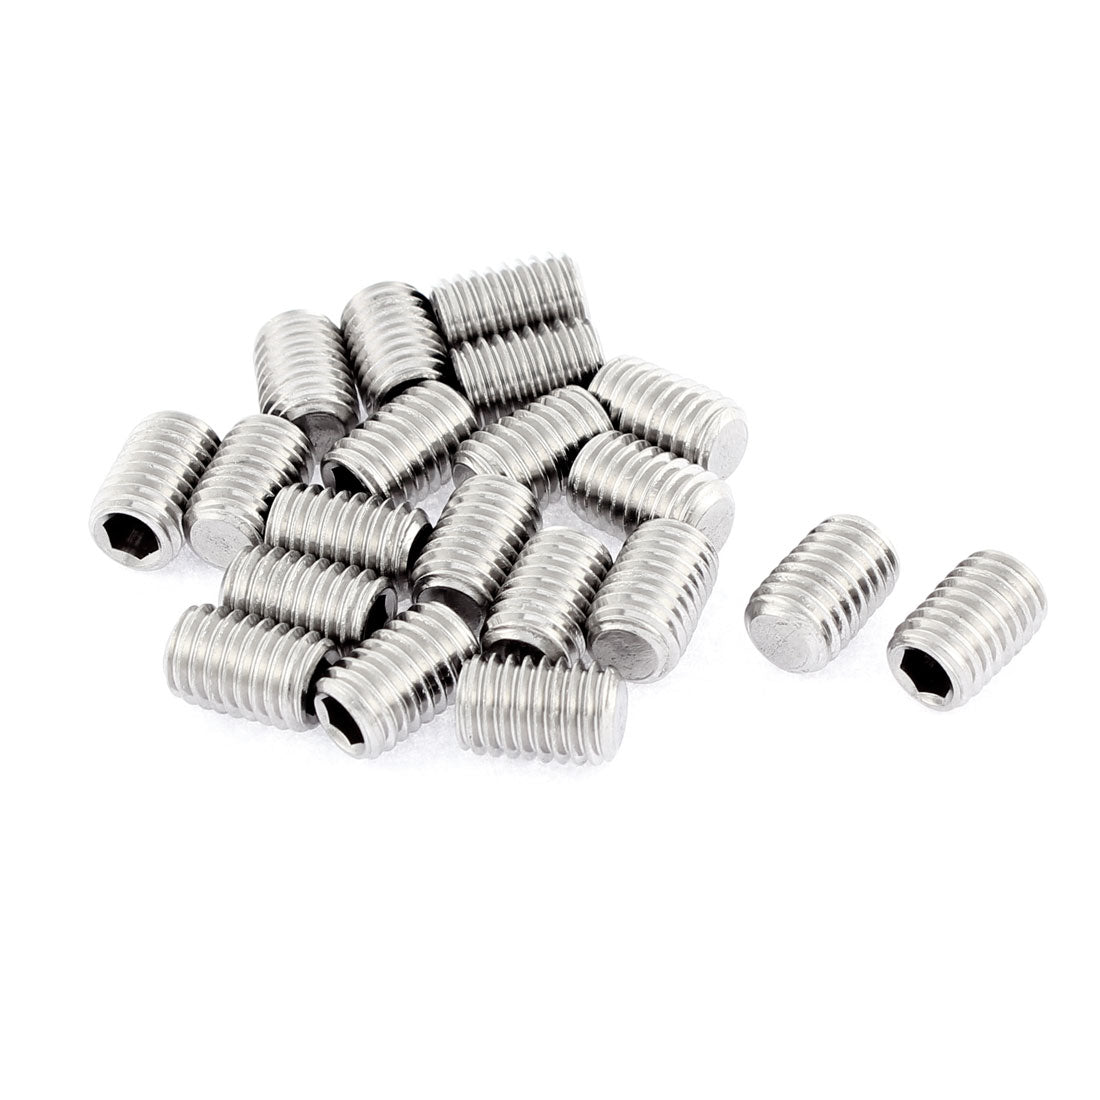 uxcell Uxcell M8x12mm 1.25mm Pitch Stainless Steel Hex Socket Set Flat Point Grub Screws 20pcs